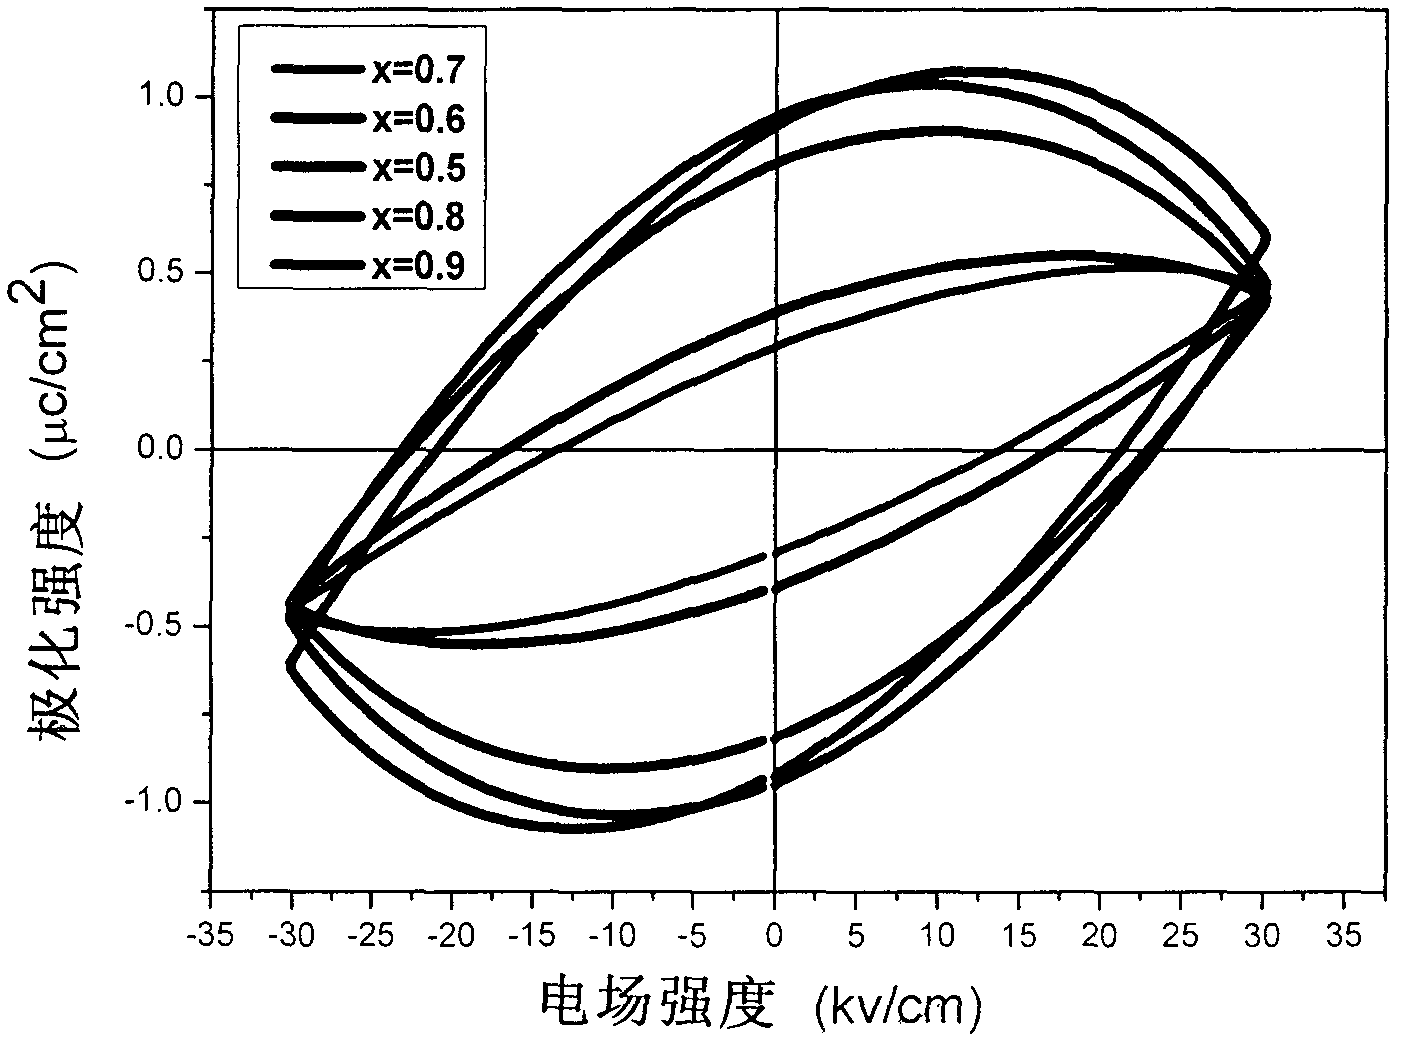 Xsrtio3-(1-x) cofe2o4 composite material and preparation method thereof